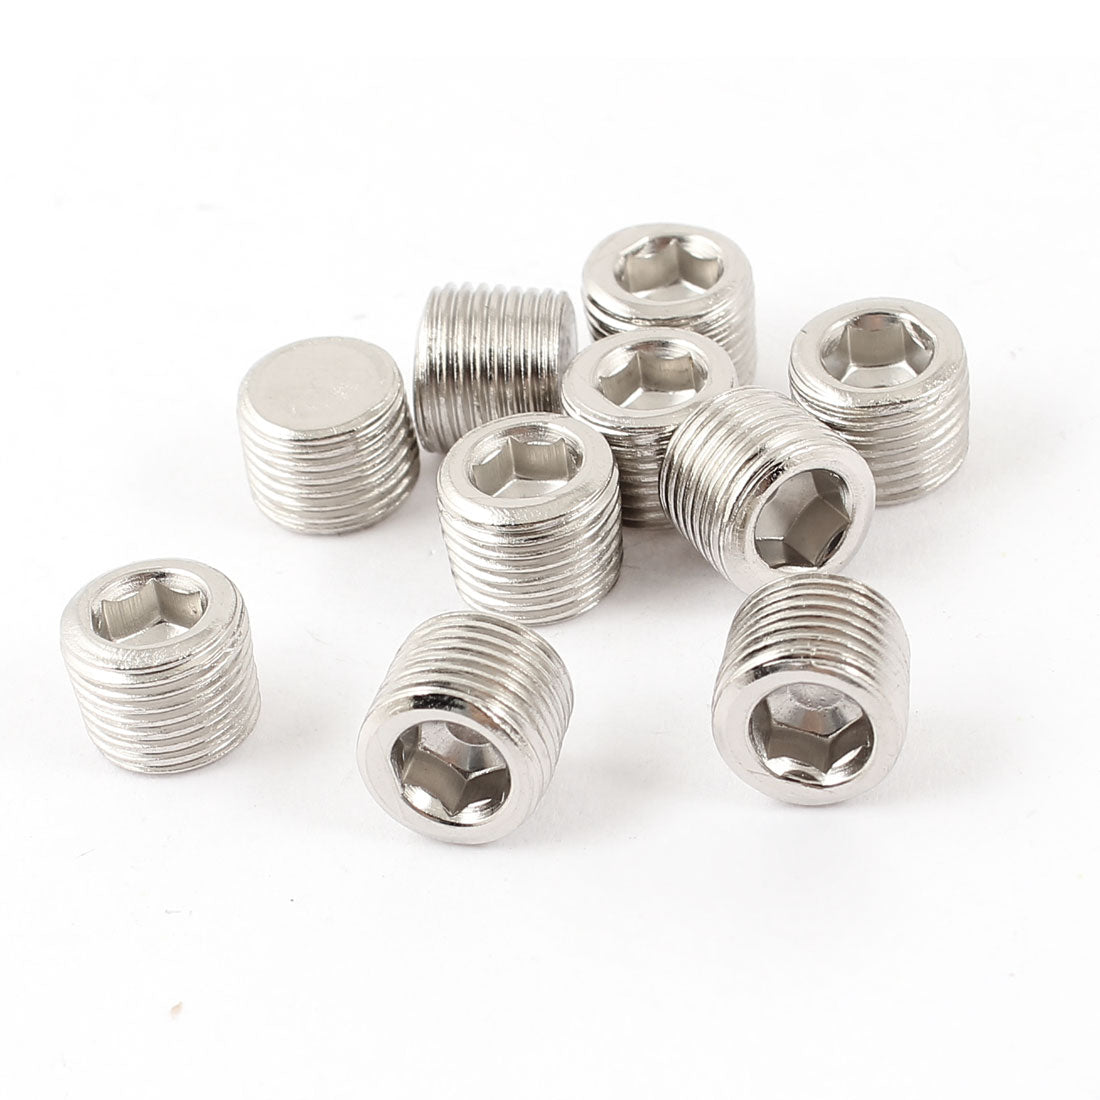 uxcell Uxcell 10 Pcs Internal Hex Head Pneumatic Pipe Fittings Socket Cap1/8PT Male Threaded